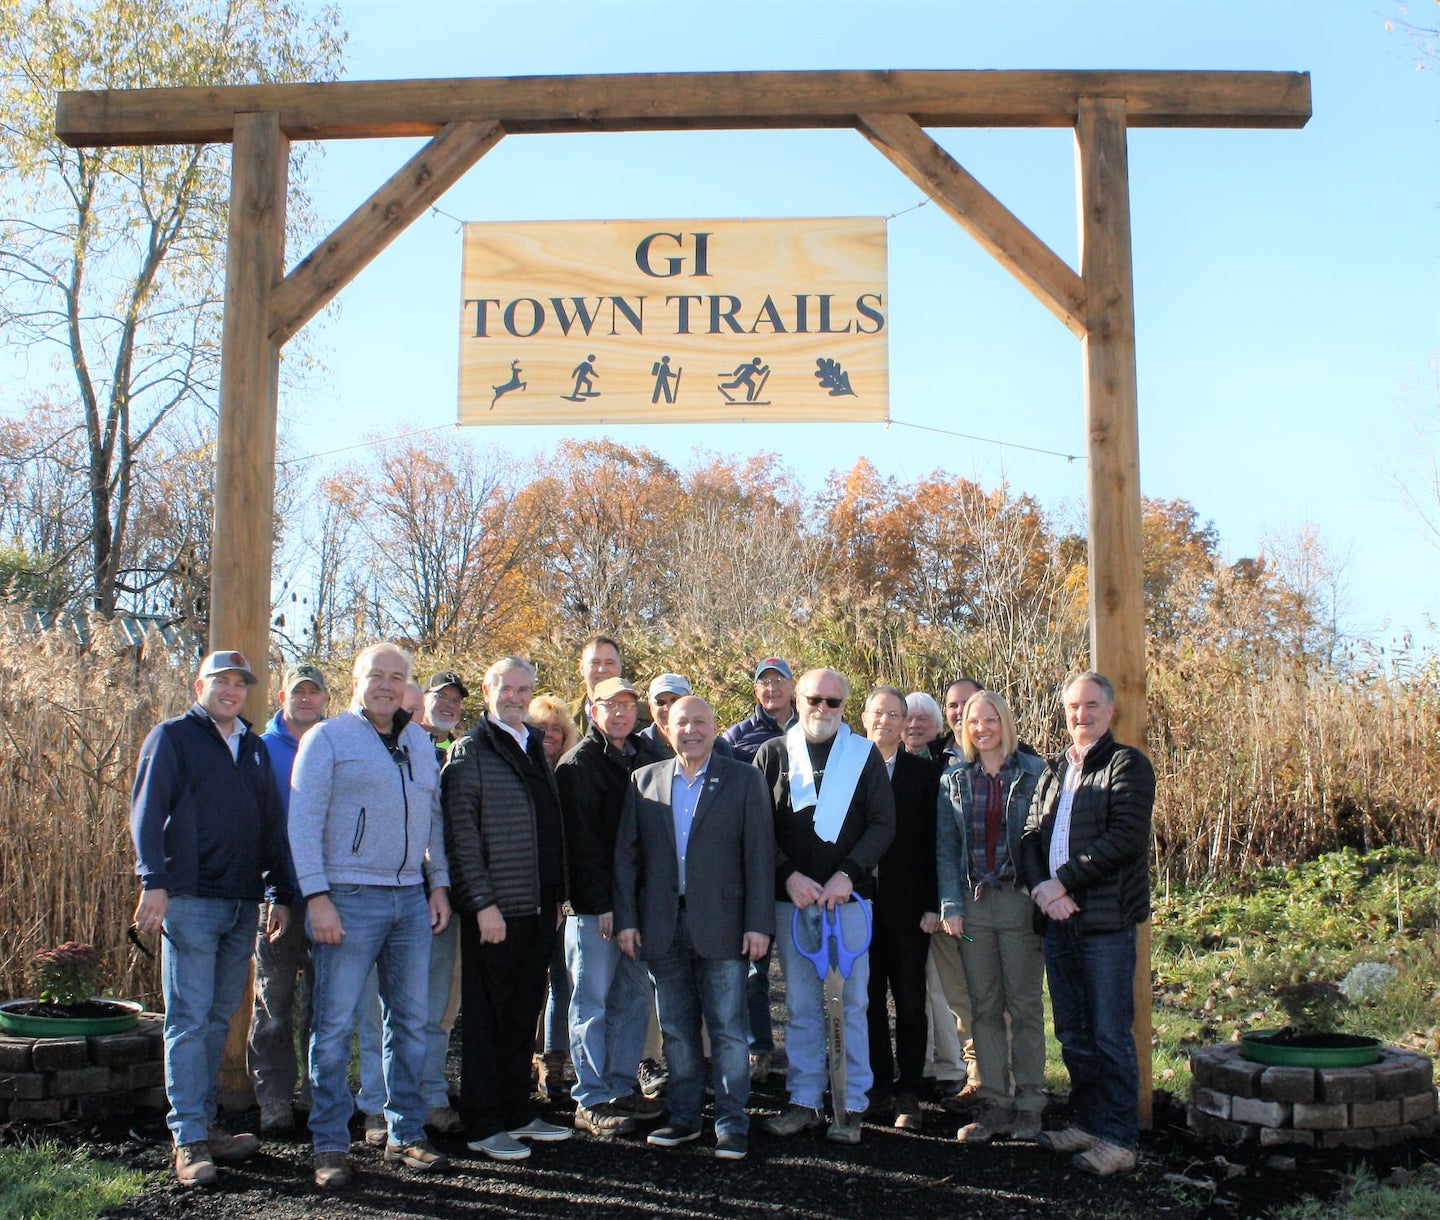 At the Nike Base Grand Island Town Trails ribbon-cutting held Nov. 21, 2021, Supervisor John Whitney (second from left) is shown with Assemblyman Angelo Morinello (center) and Niagara River Greenway Executive Director Greg Stevens. (Photo provided by the Town of Grand Island)